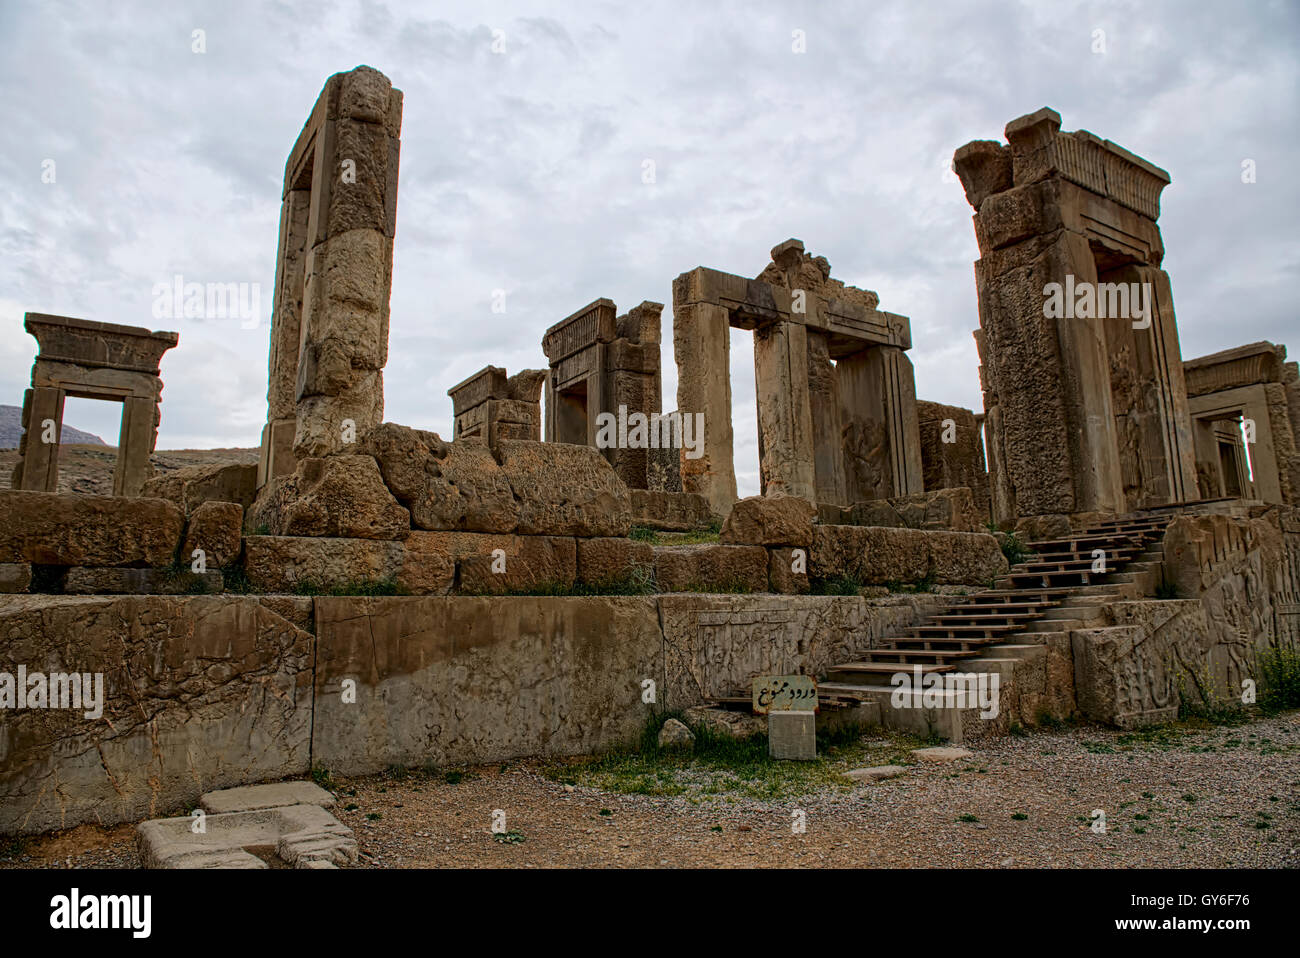 Ruins of the Tachara, side view Stock Photo